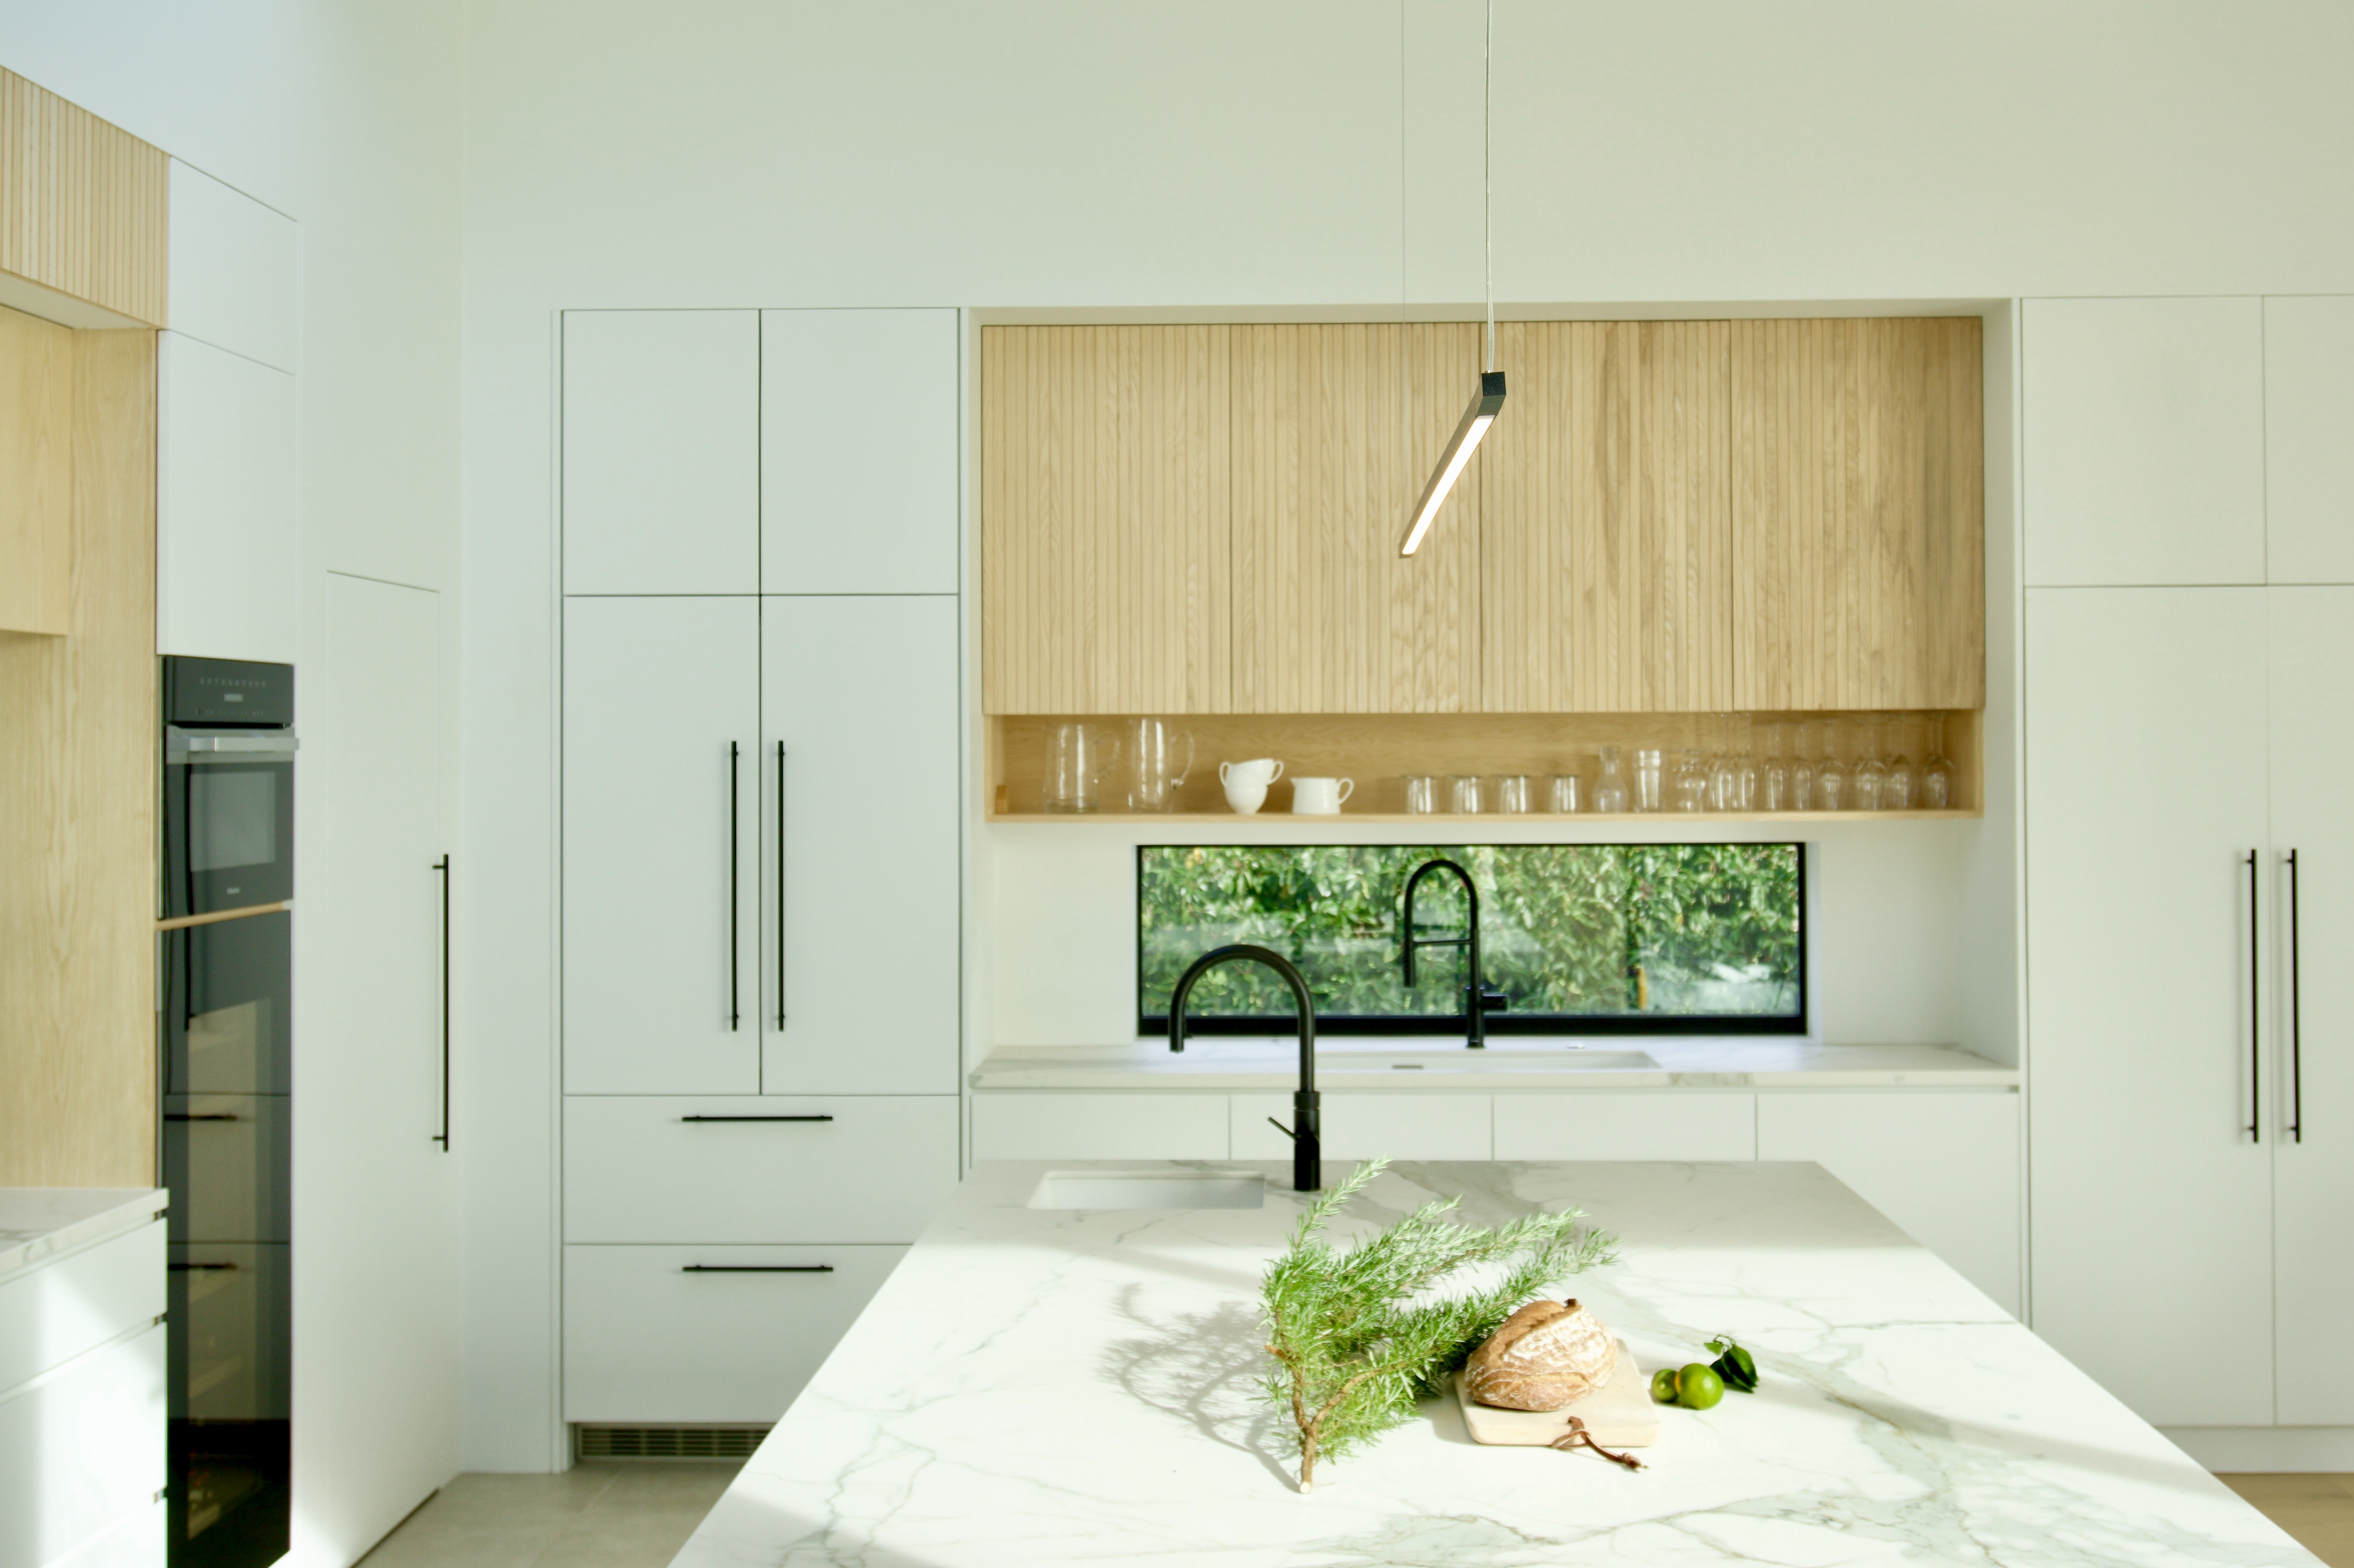 Modern kitchen with white and reeded Ash cupboards and detailing.